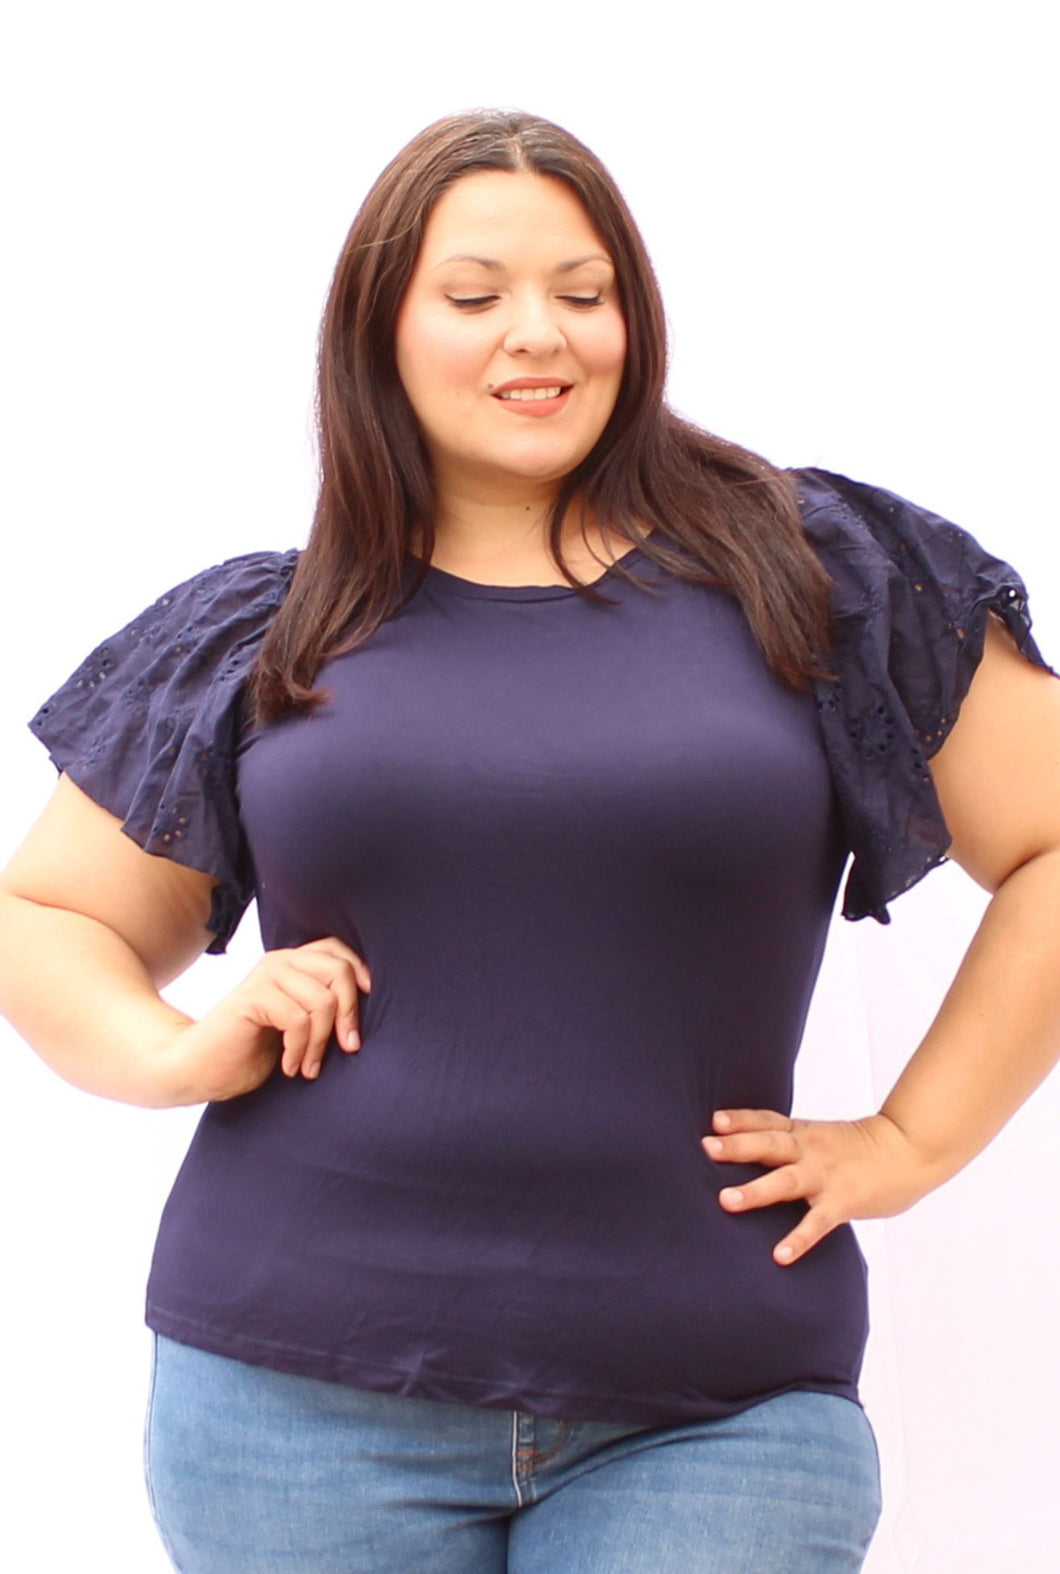 Bloomchic Fitted Large Flutter Sleeve Top. Sizes 14, 20